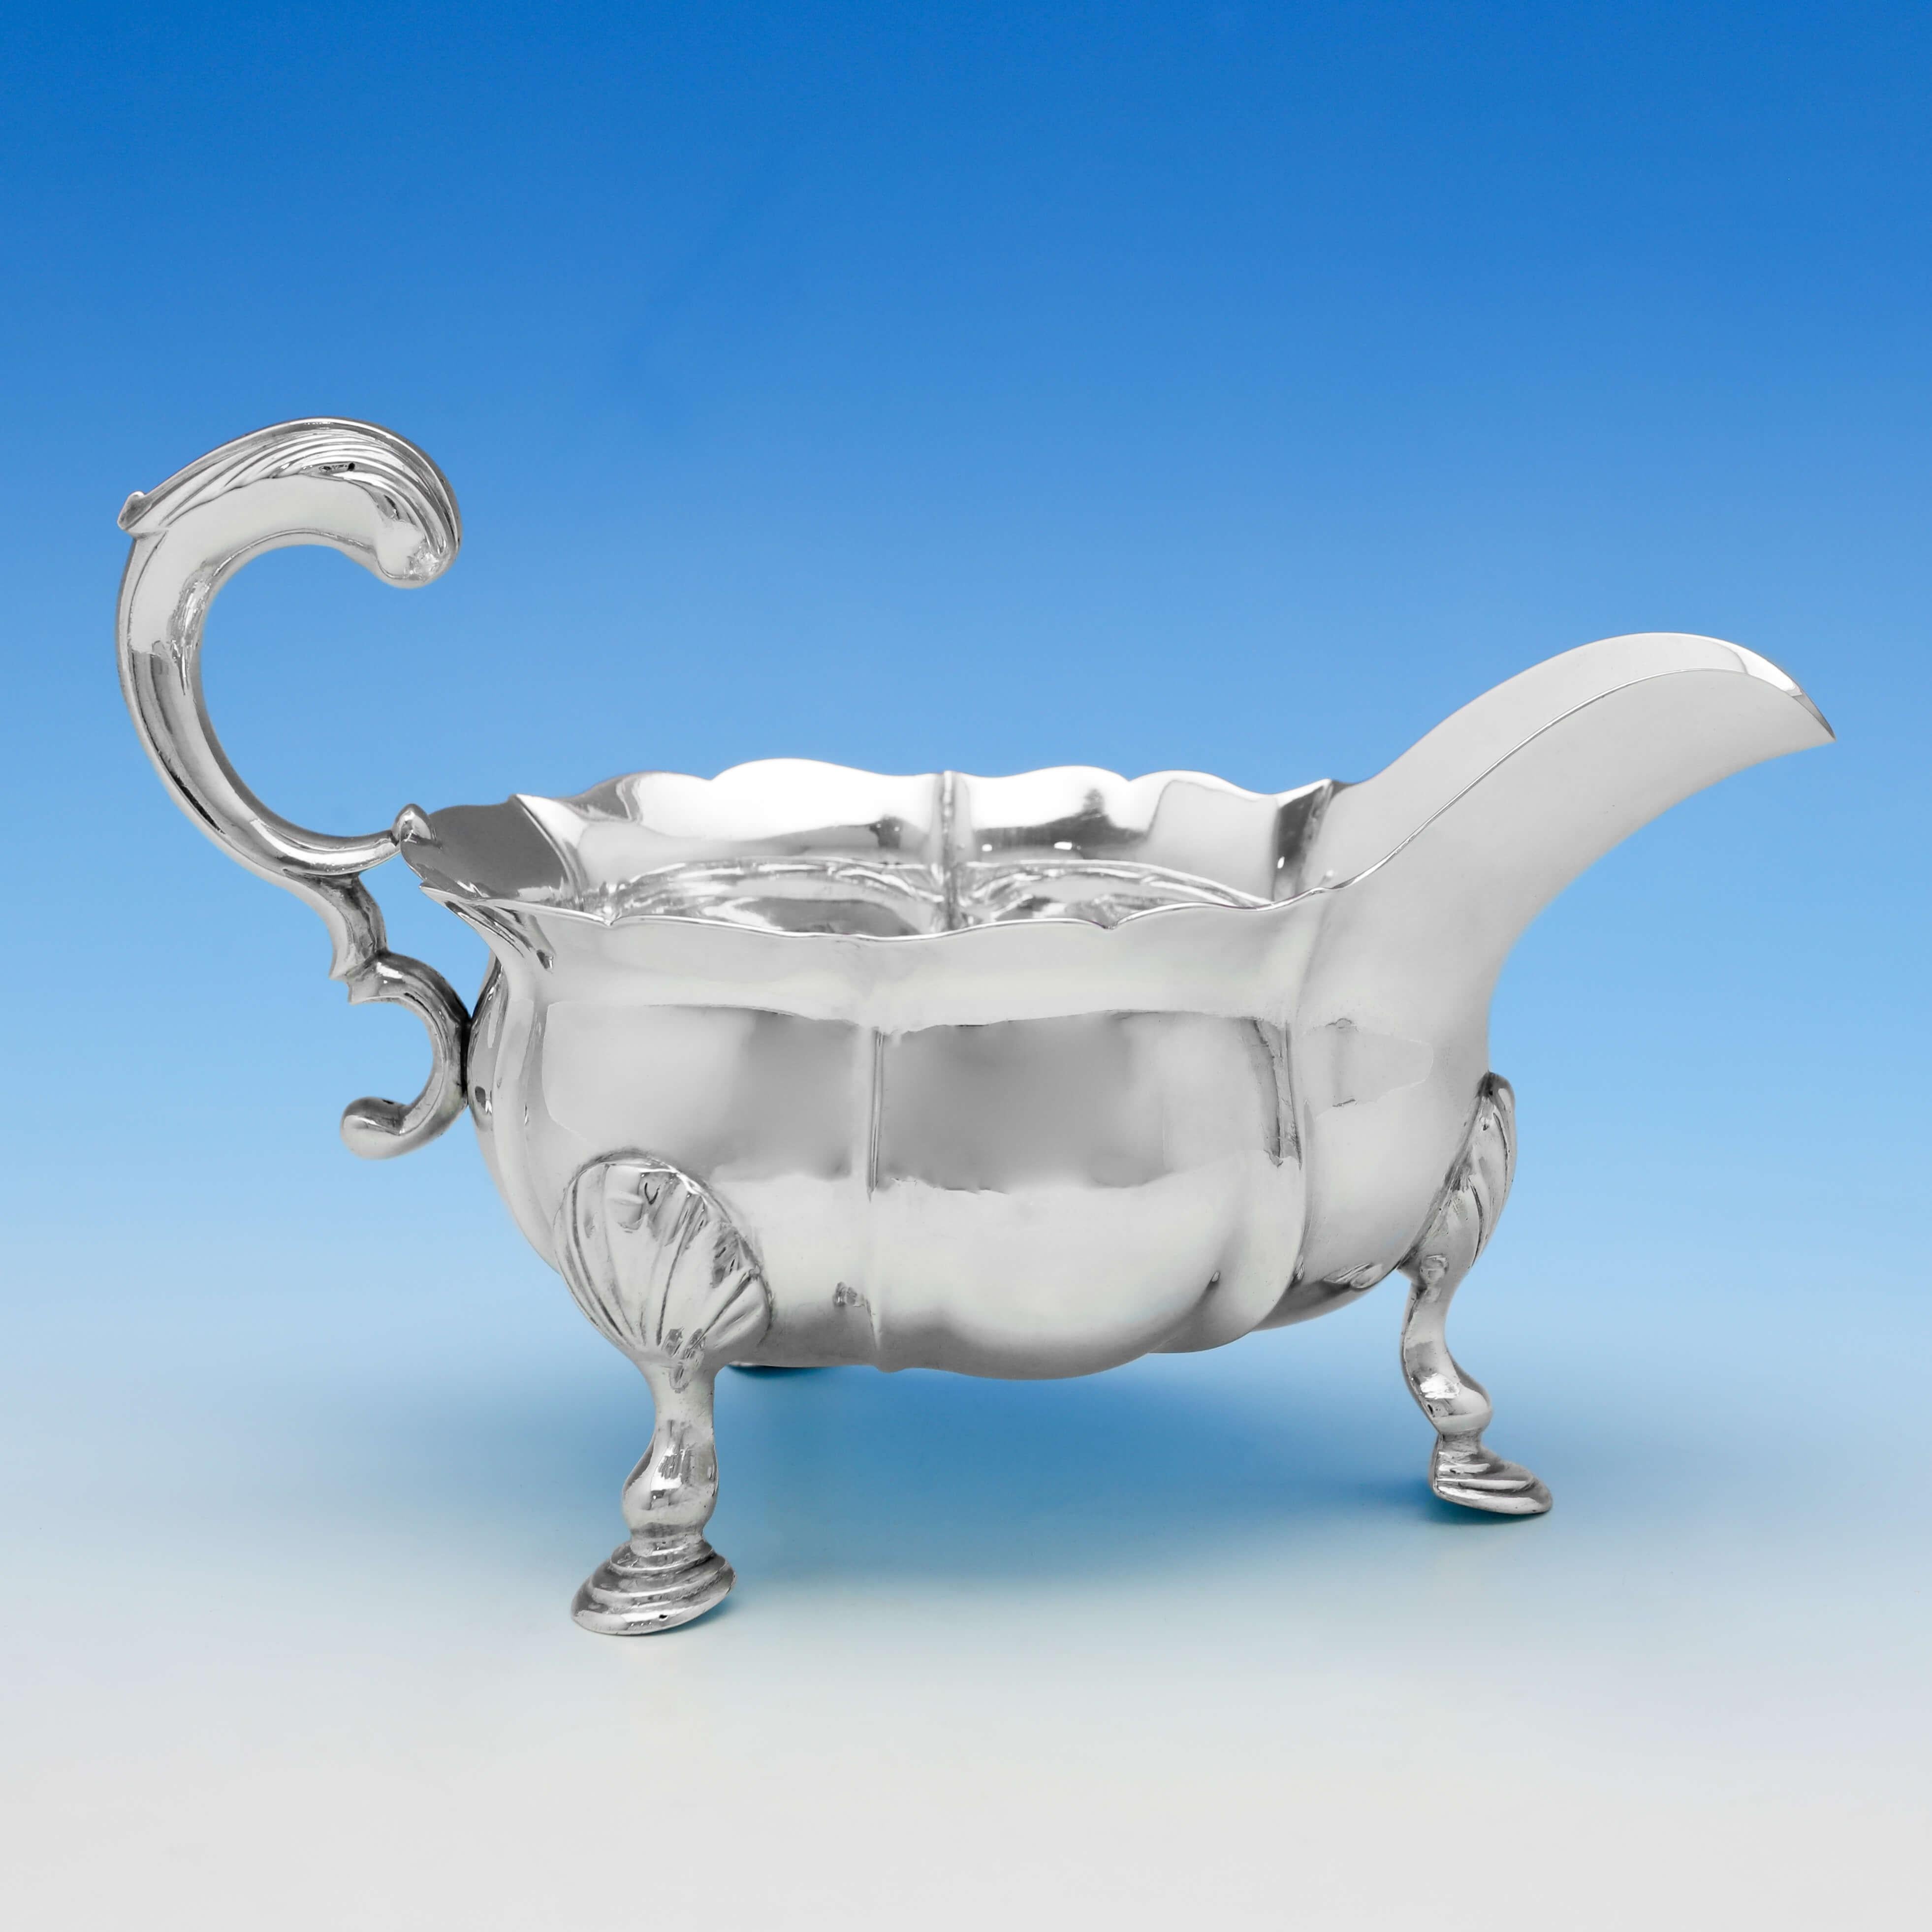 Hallmarked in London in 1749 by John Pollock, this striking pair of George II, antique sterling silver sauce boats, feature shaped borders and sides, acanthus detailed handles, and stand on three feet. Each sauce boat measures 5